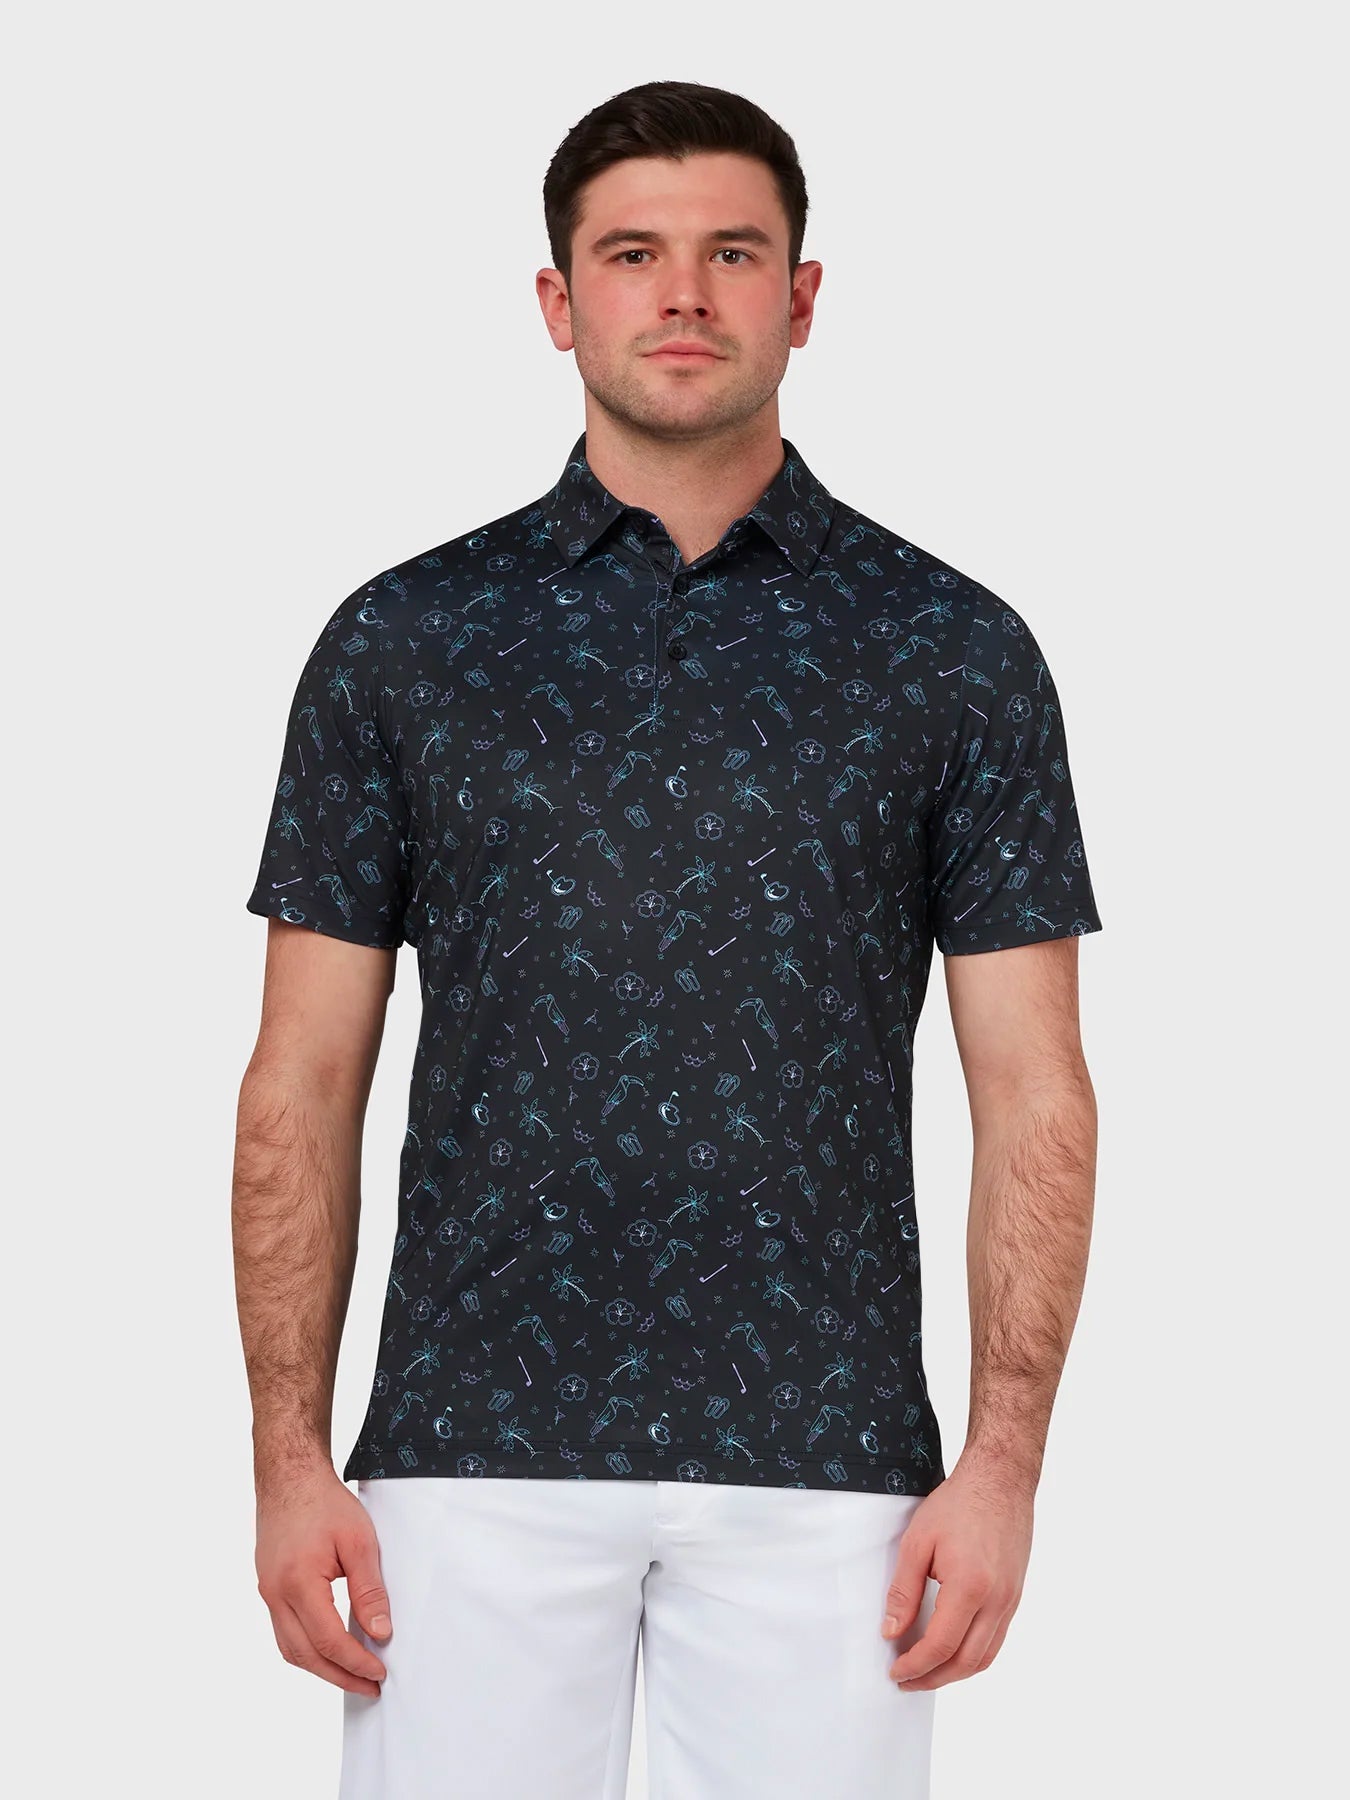 View All Over Golf Tucan Print Polo In Caviar Caviar M information